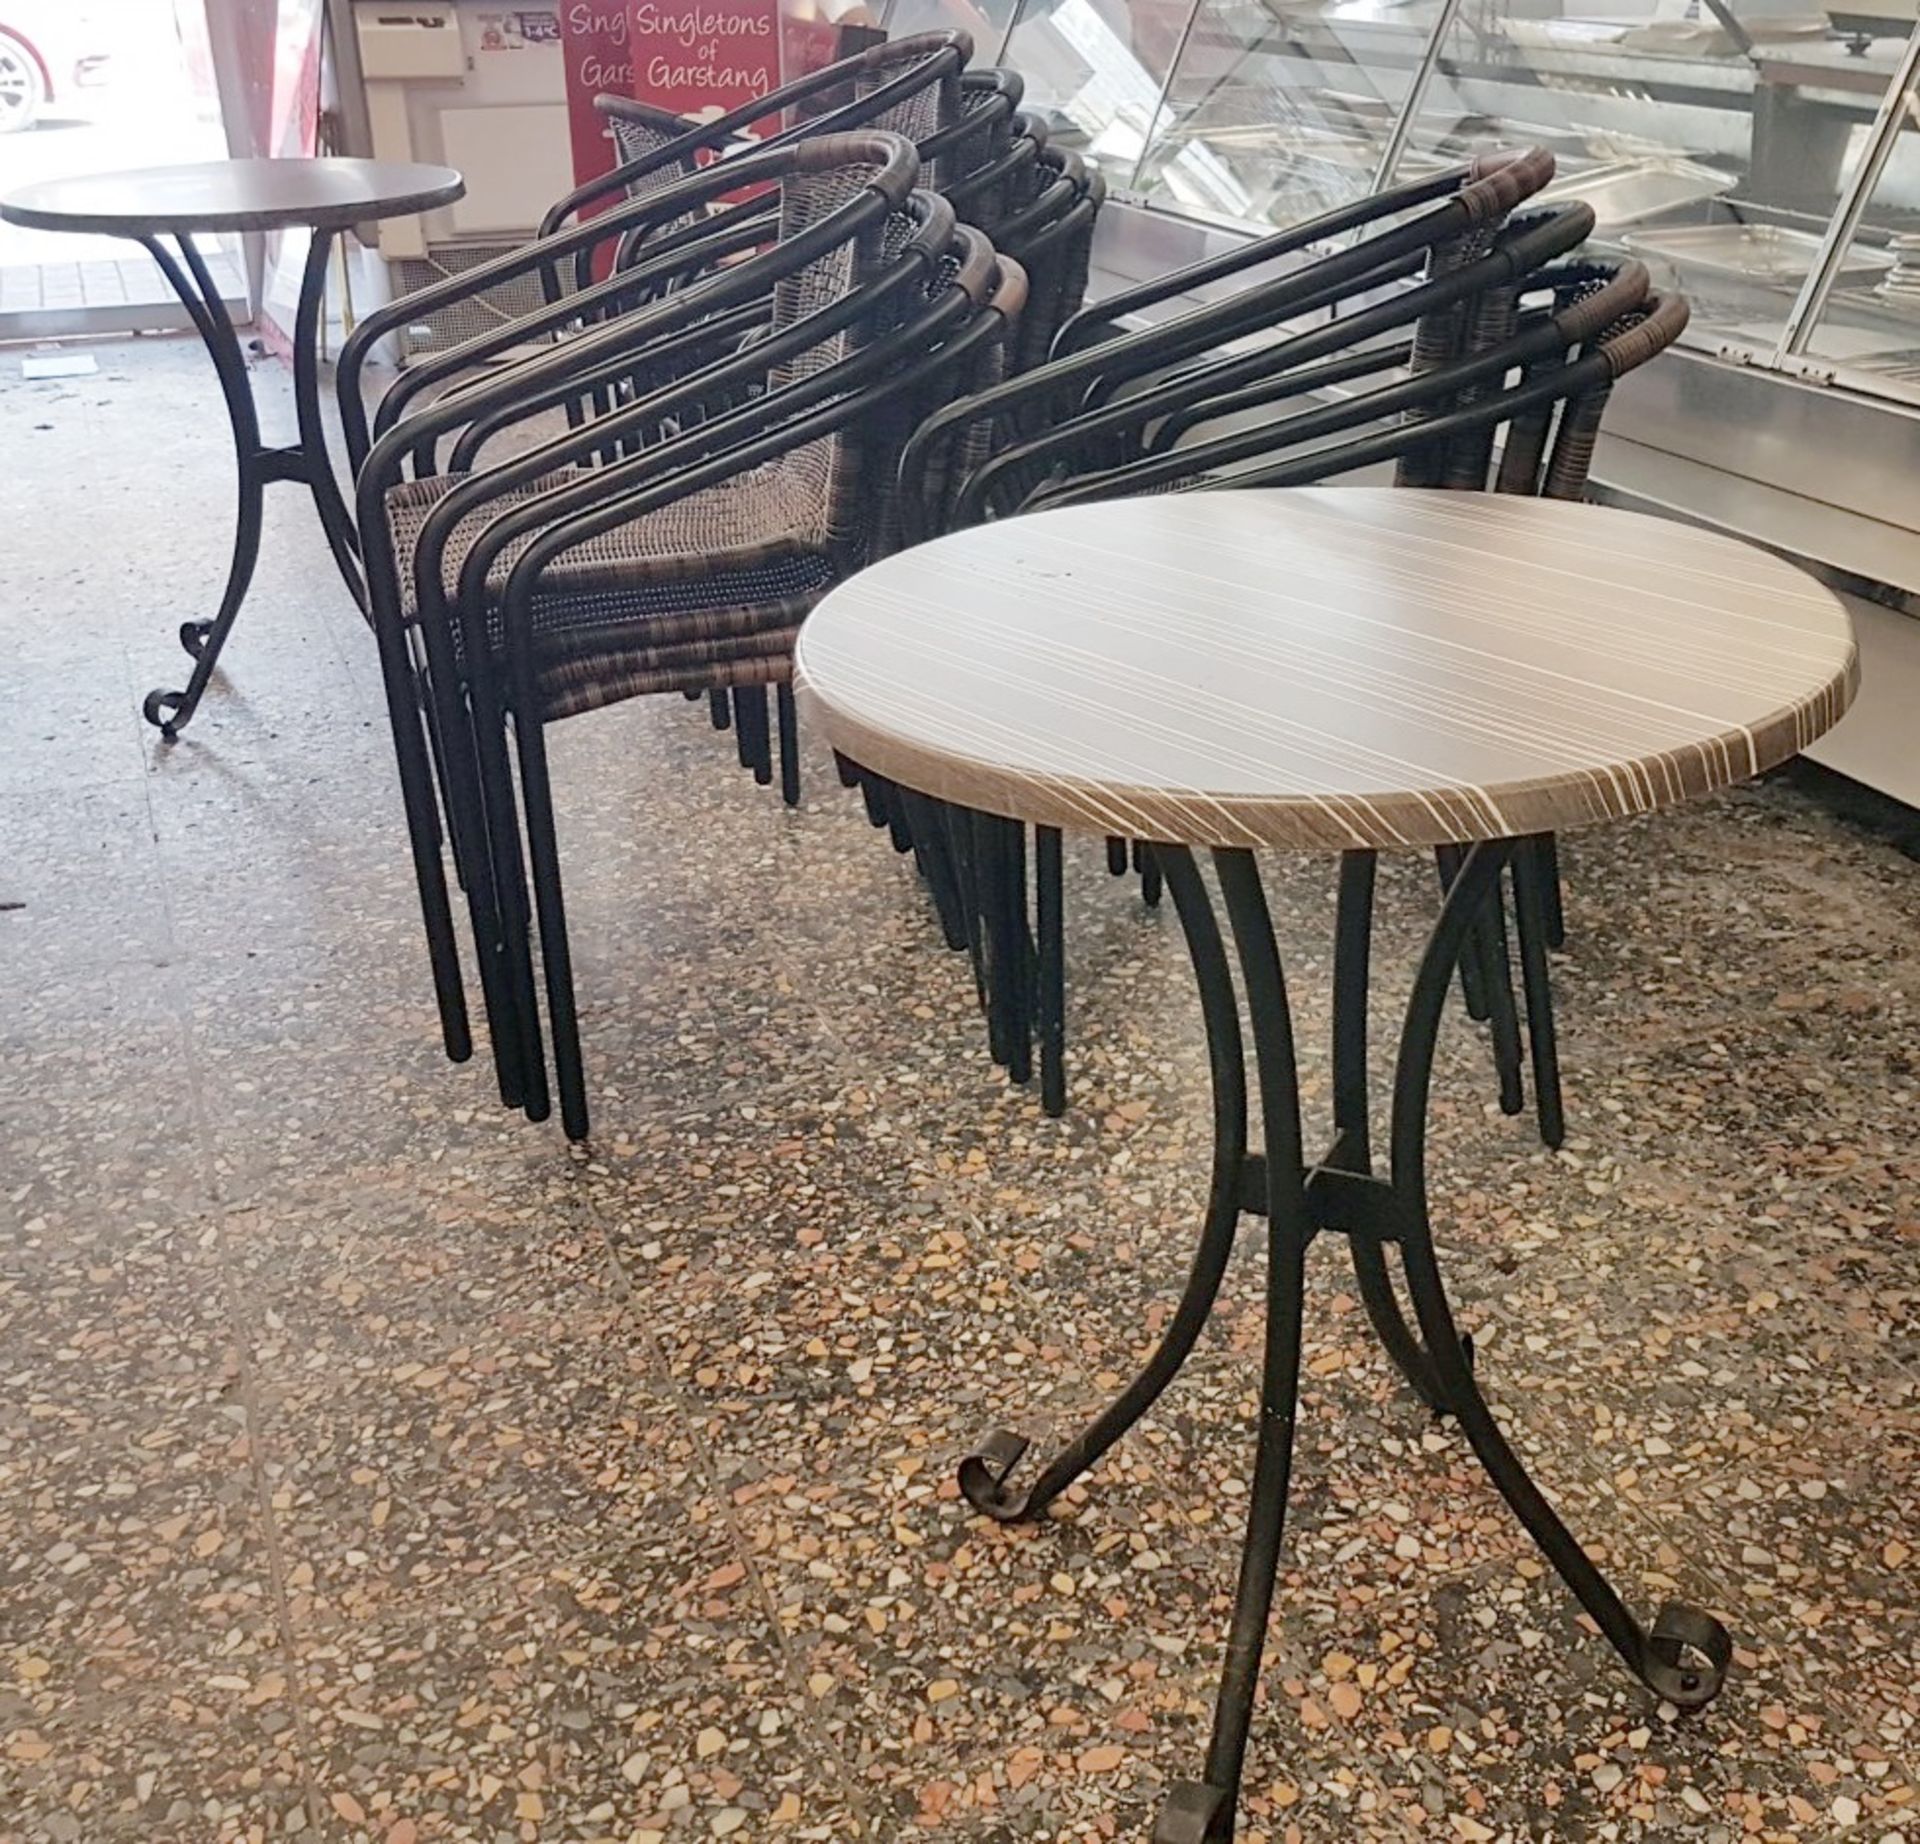 6 x Outdoor Bistro Tables With 14 x Stackable Wrought Iron & Ratten Chairs - 2 Sizes - Ref: SIN001 -